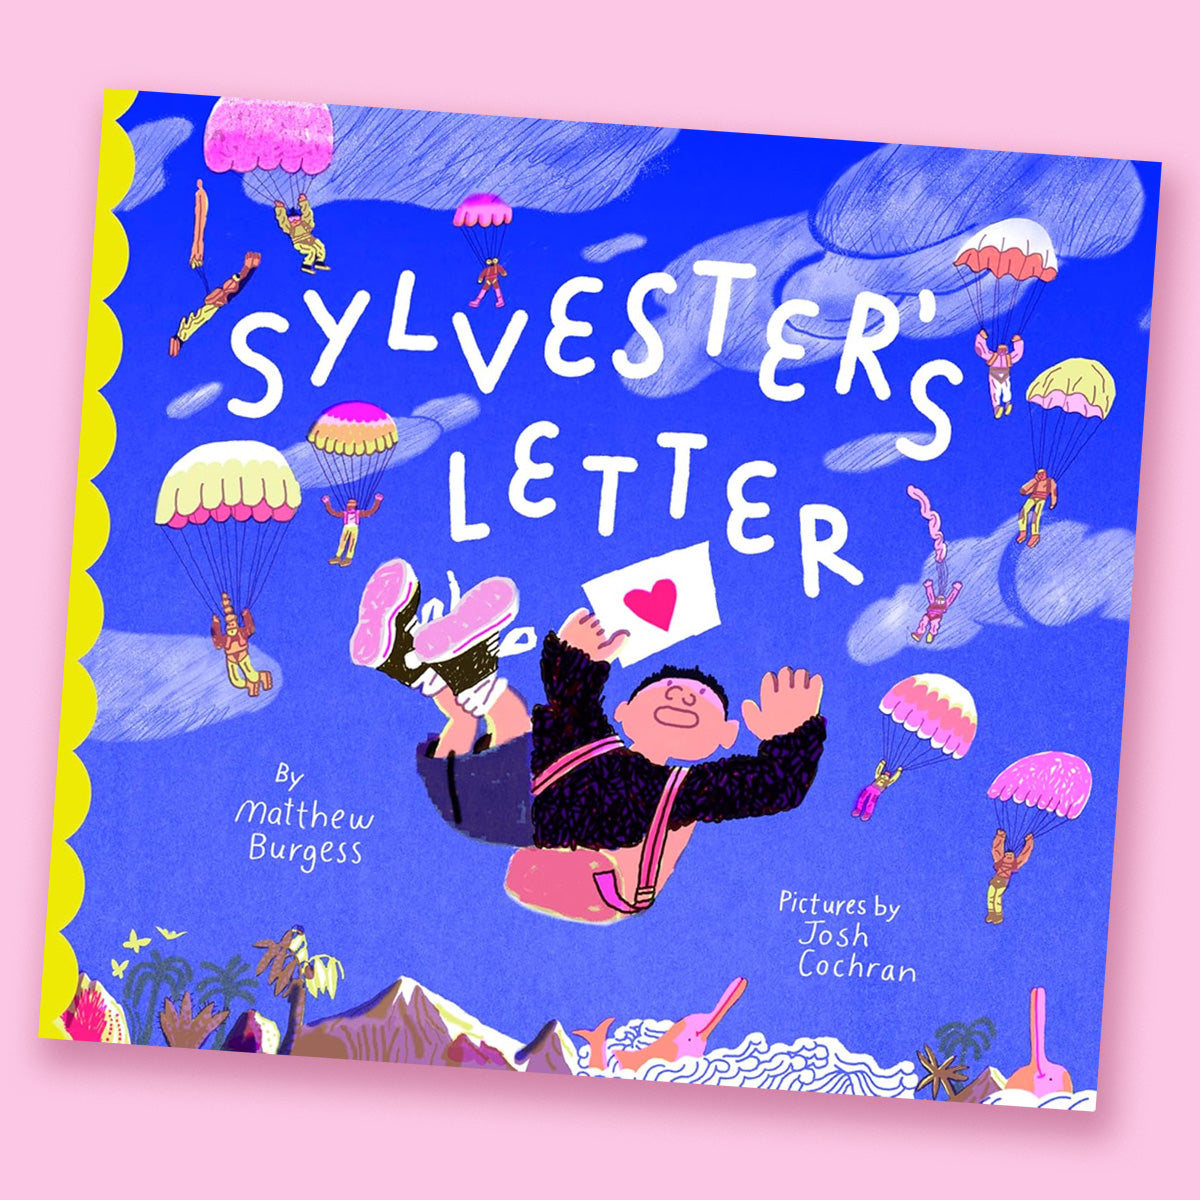 Sylvester's Letter by Matthew Burgess and Josh Cochran